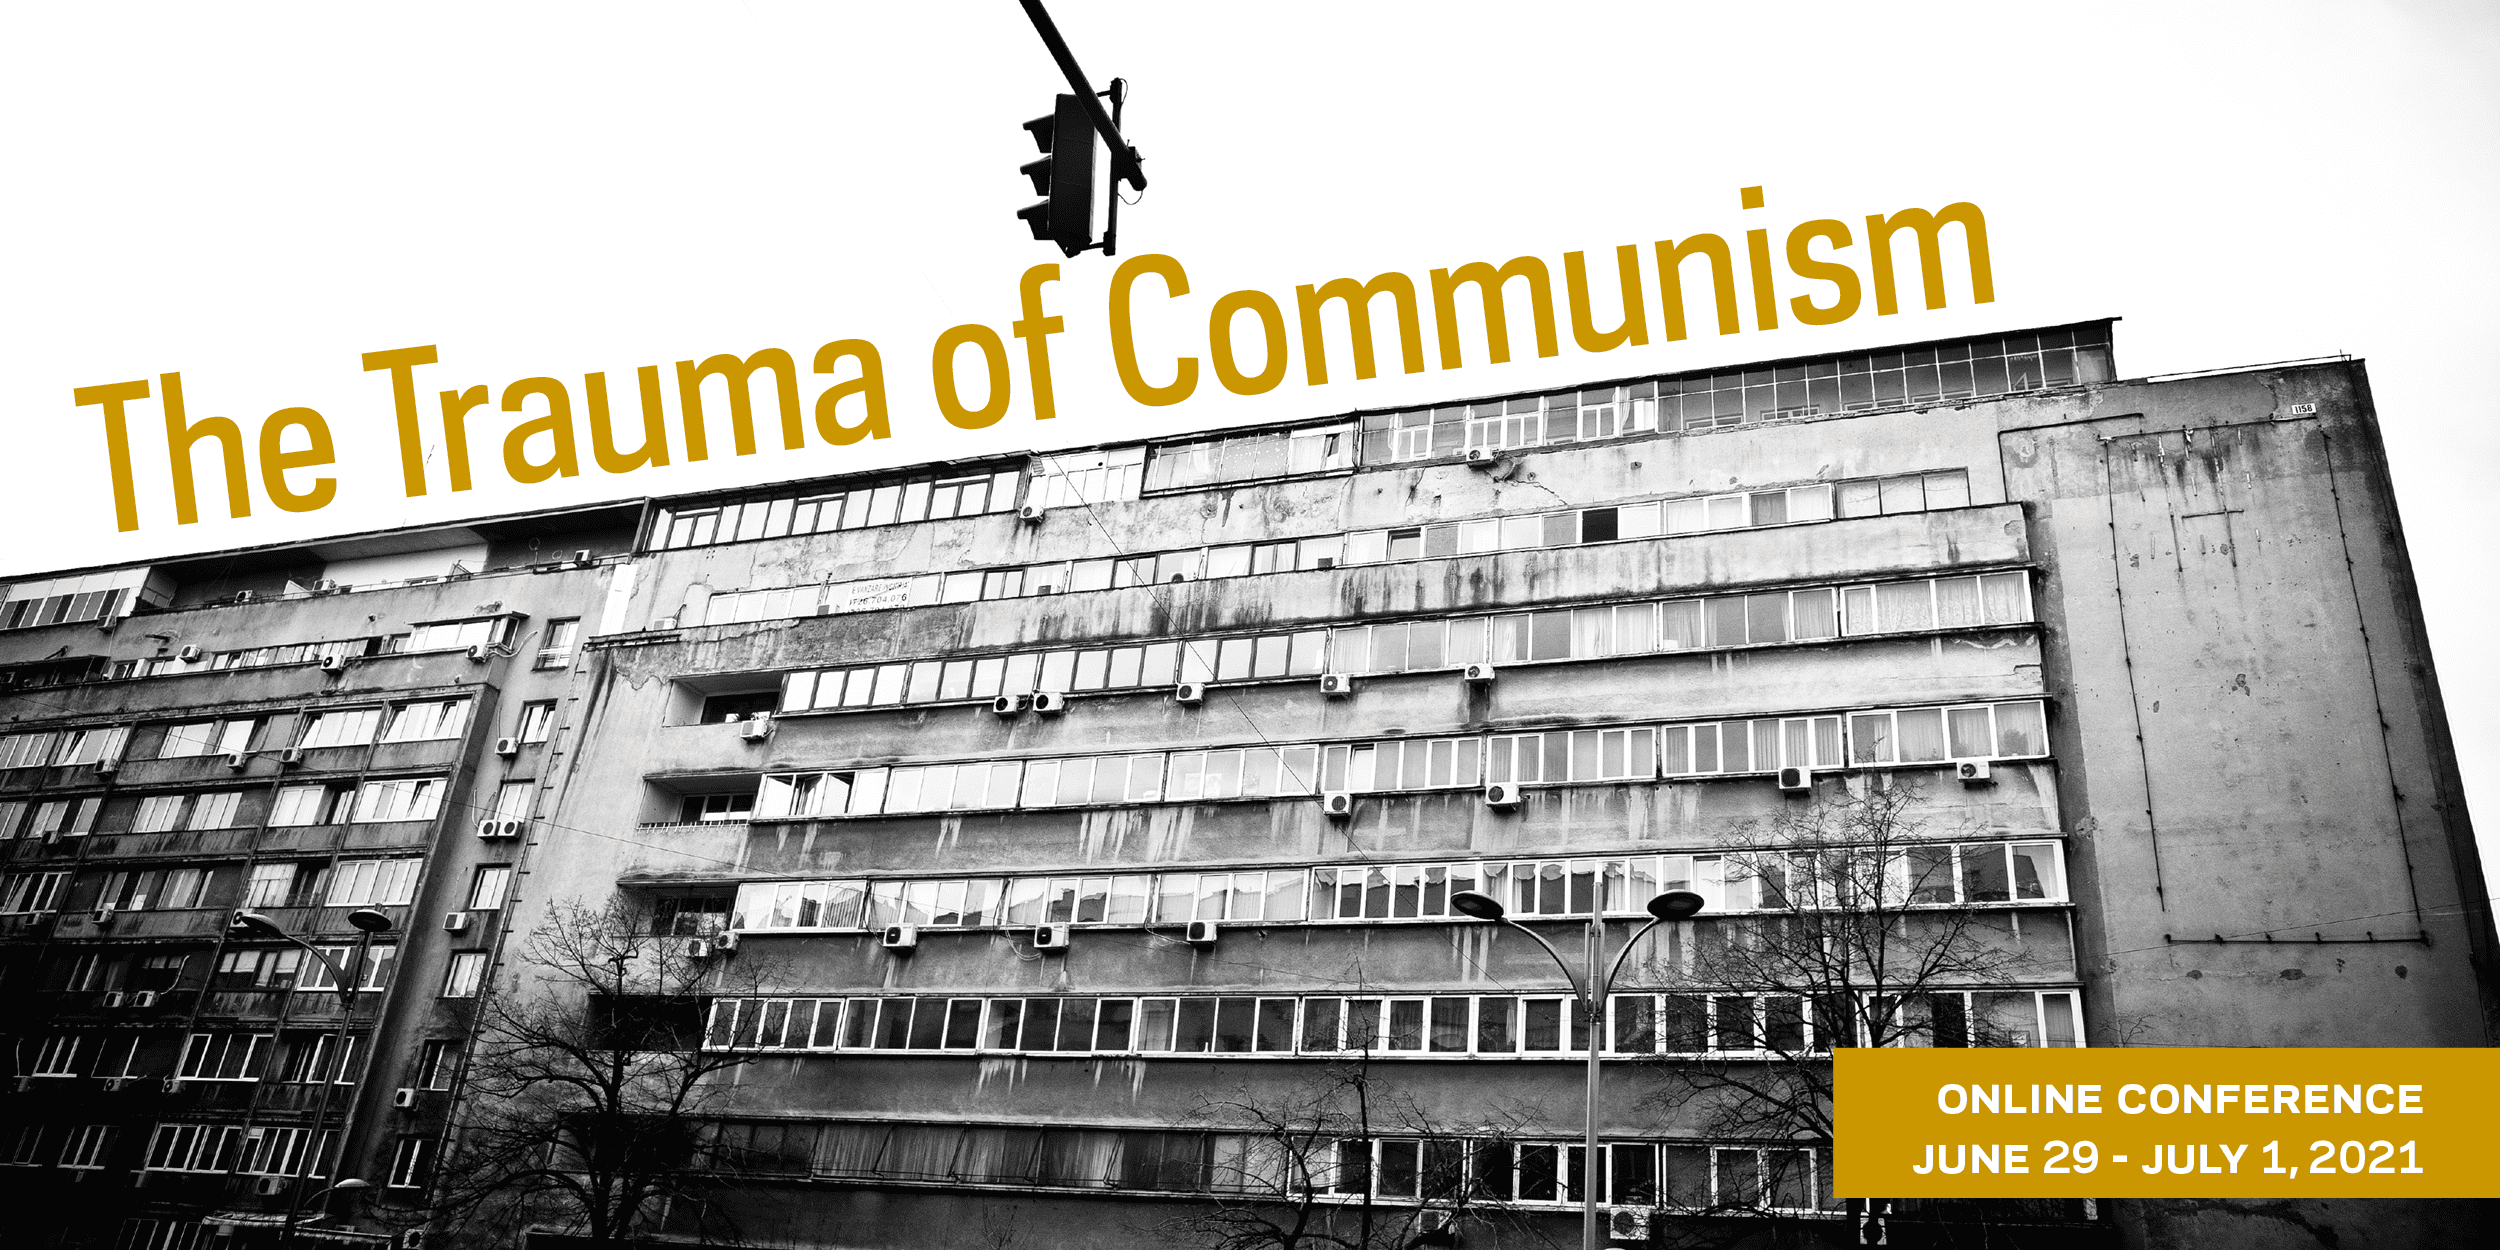 Conference: The Trauma of Communism